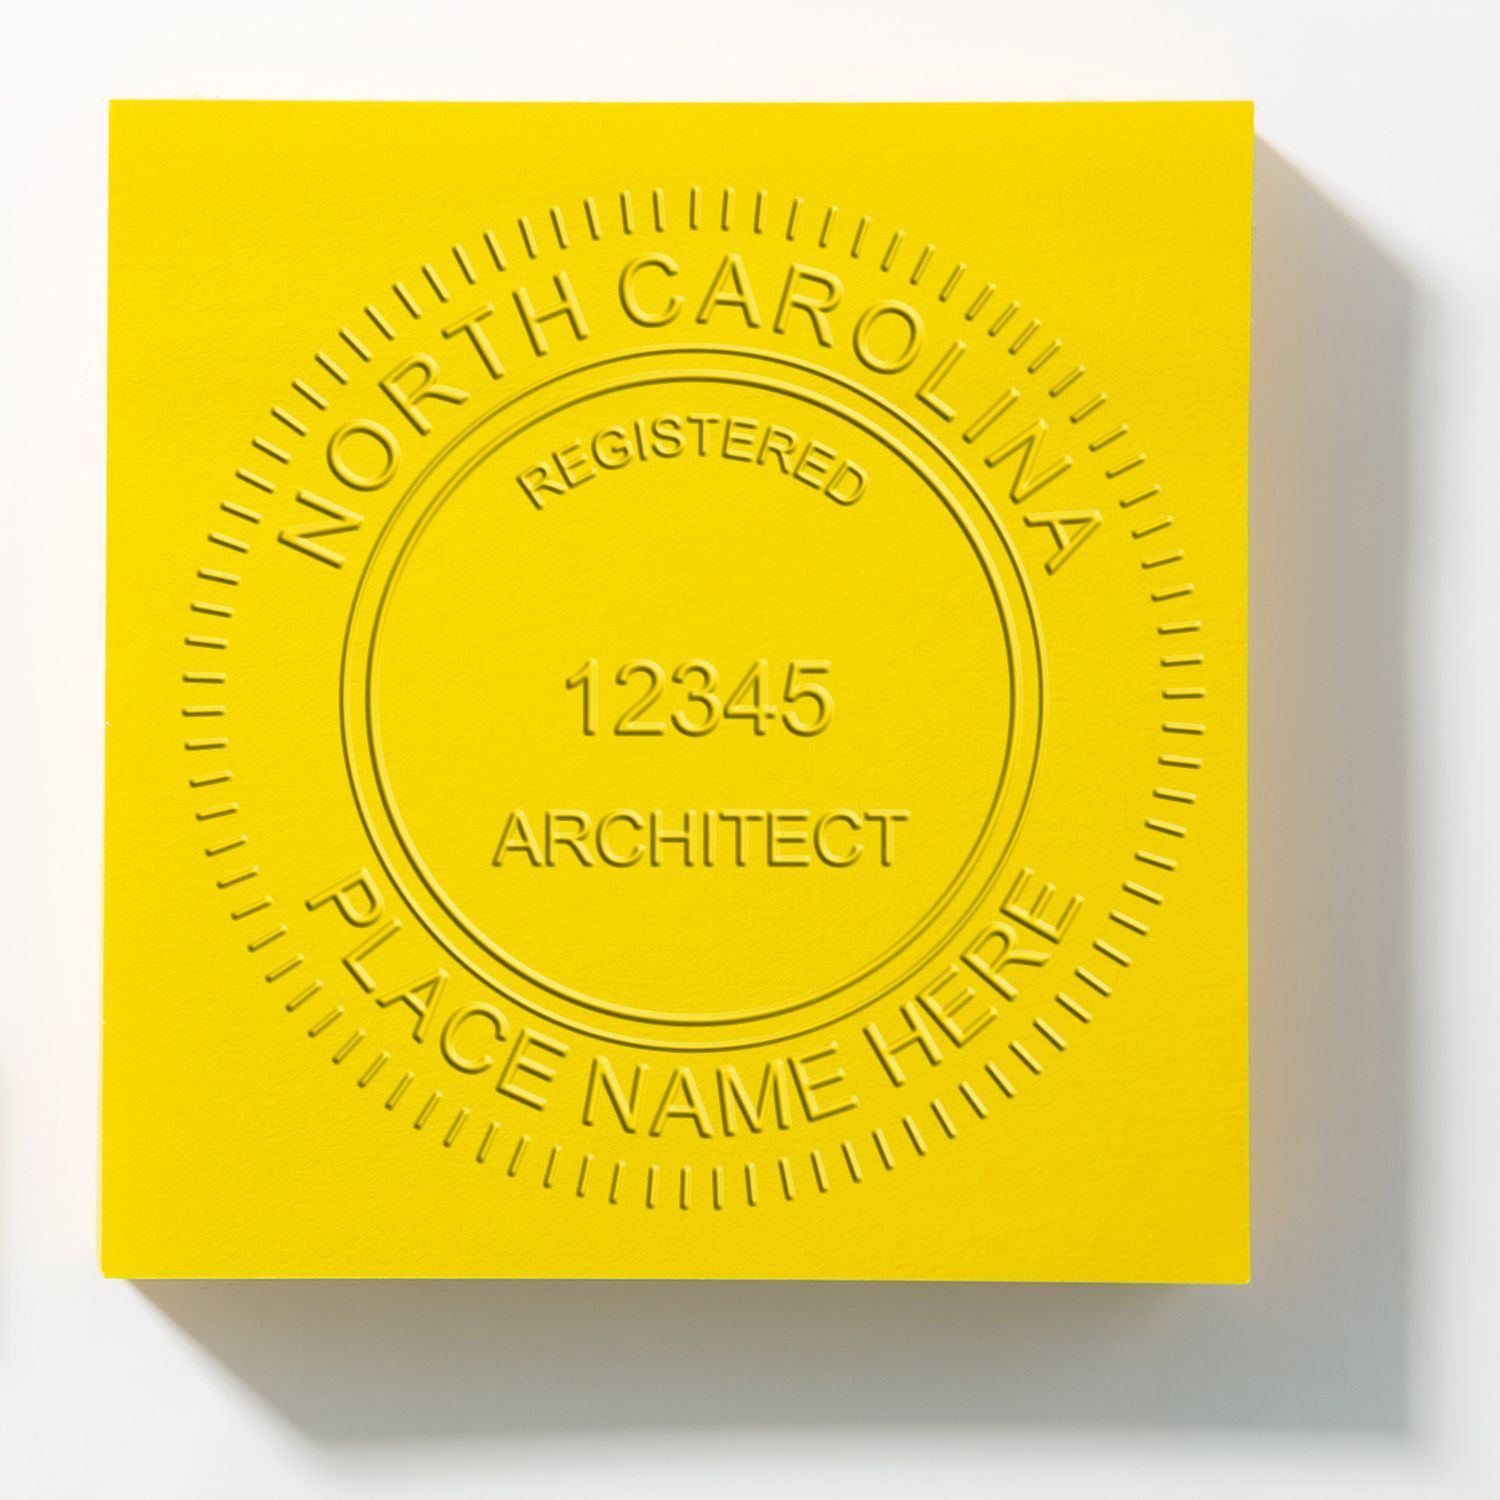 An alternative view of the Heavy Duty Cast Iron North Carolina Architect Embosser stamped on a sheet of paper showing the image in use